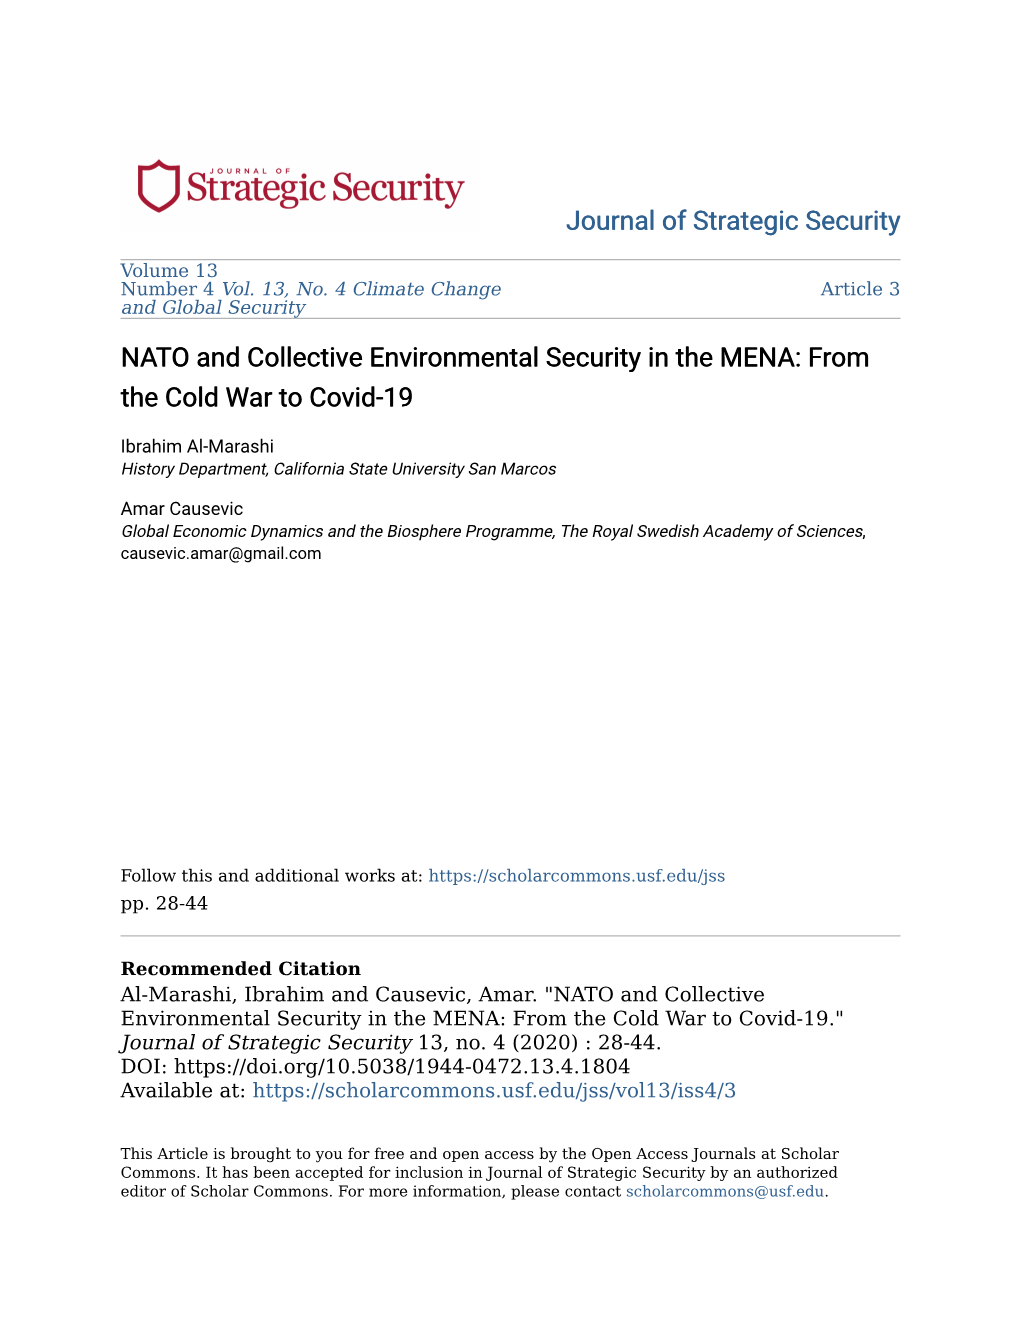 NATO and Collective Environmental Security in the MENA: from the Cold War to Covid-19